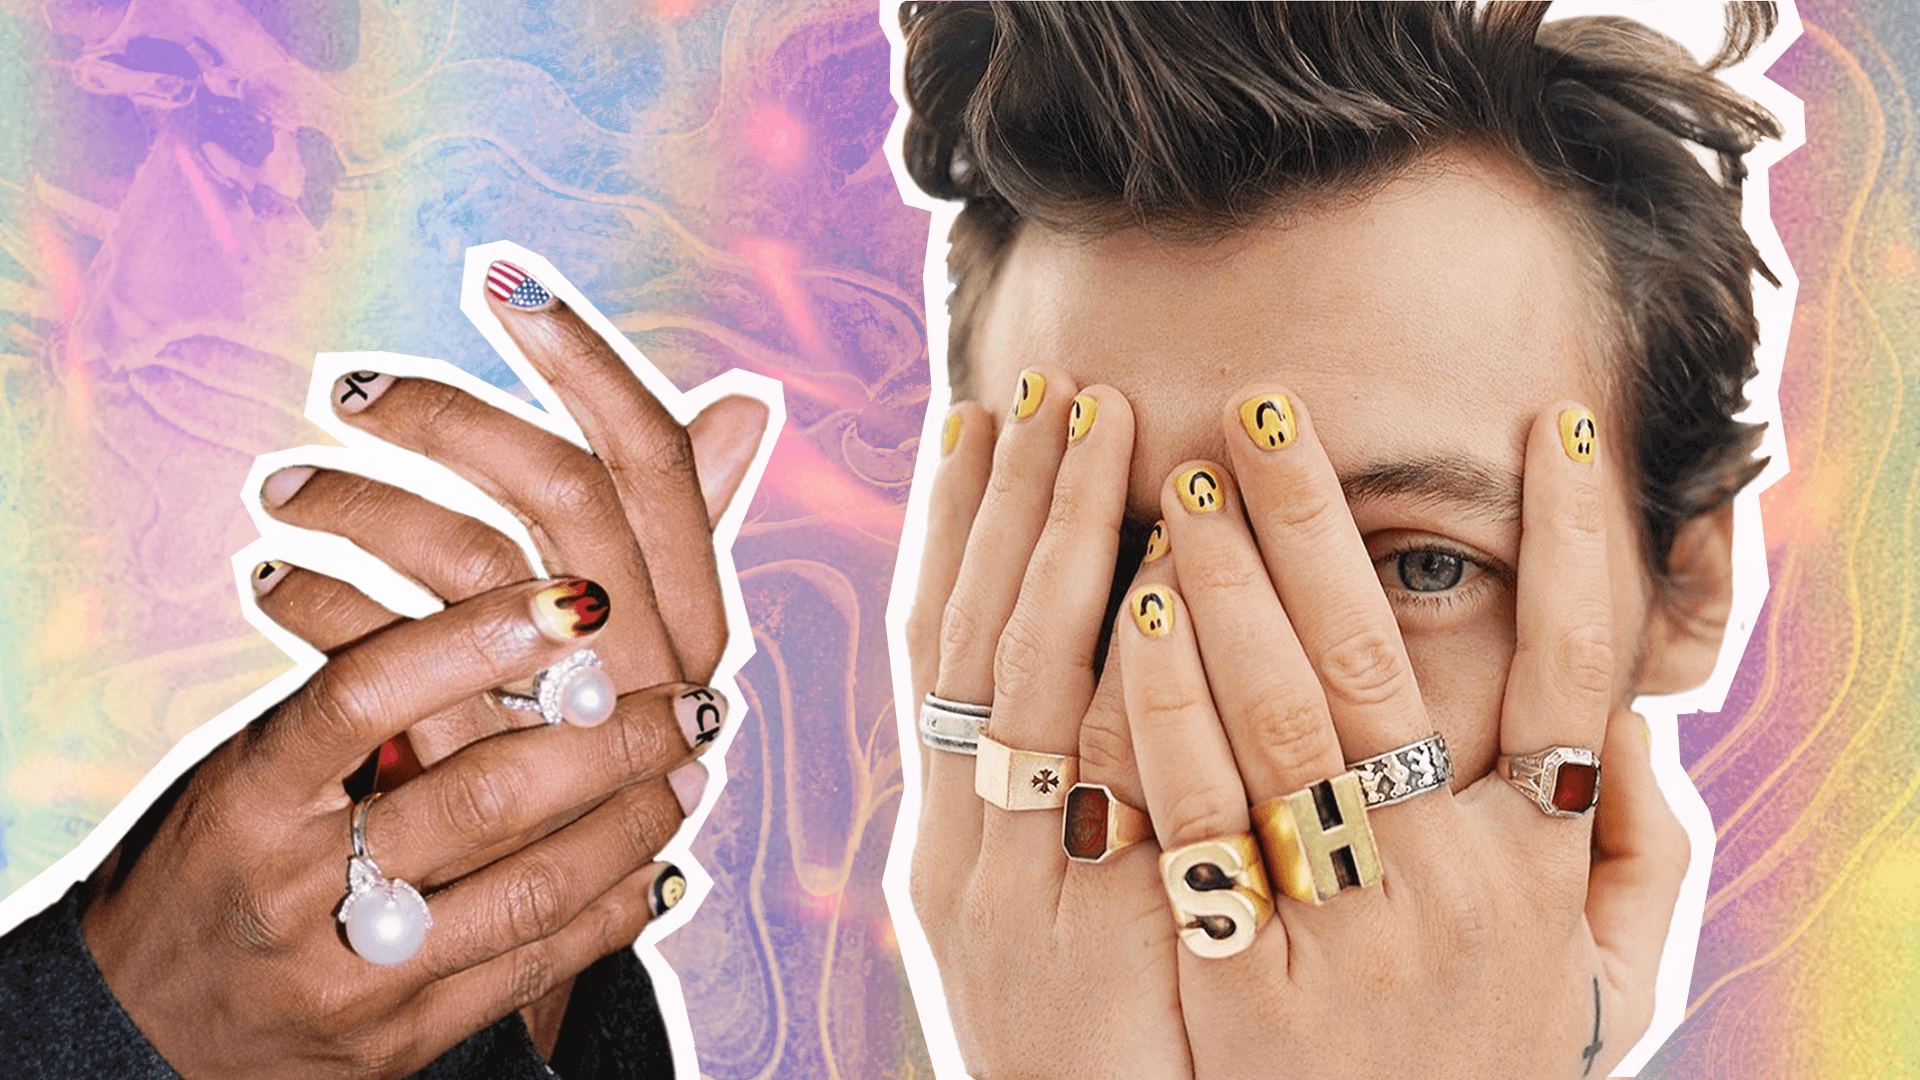 10 Nail Designs For Your Next MANicure - The Tease